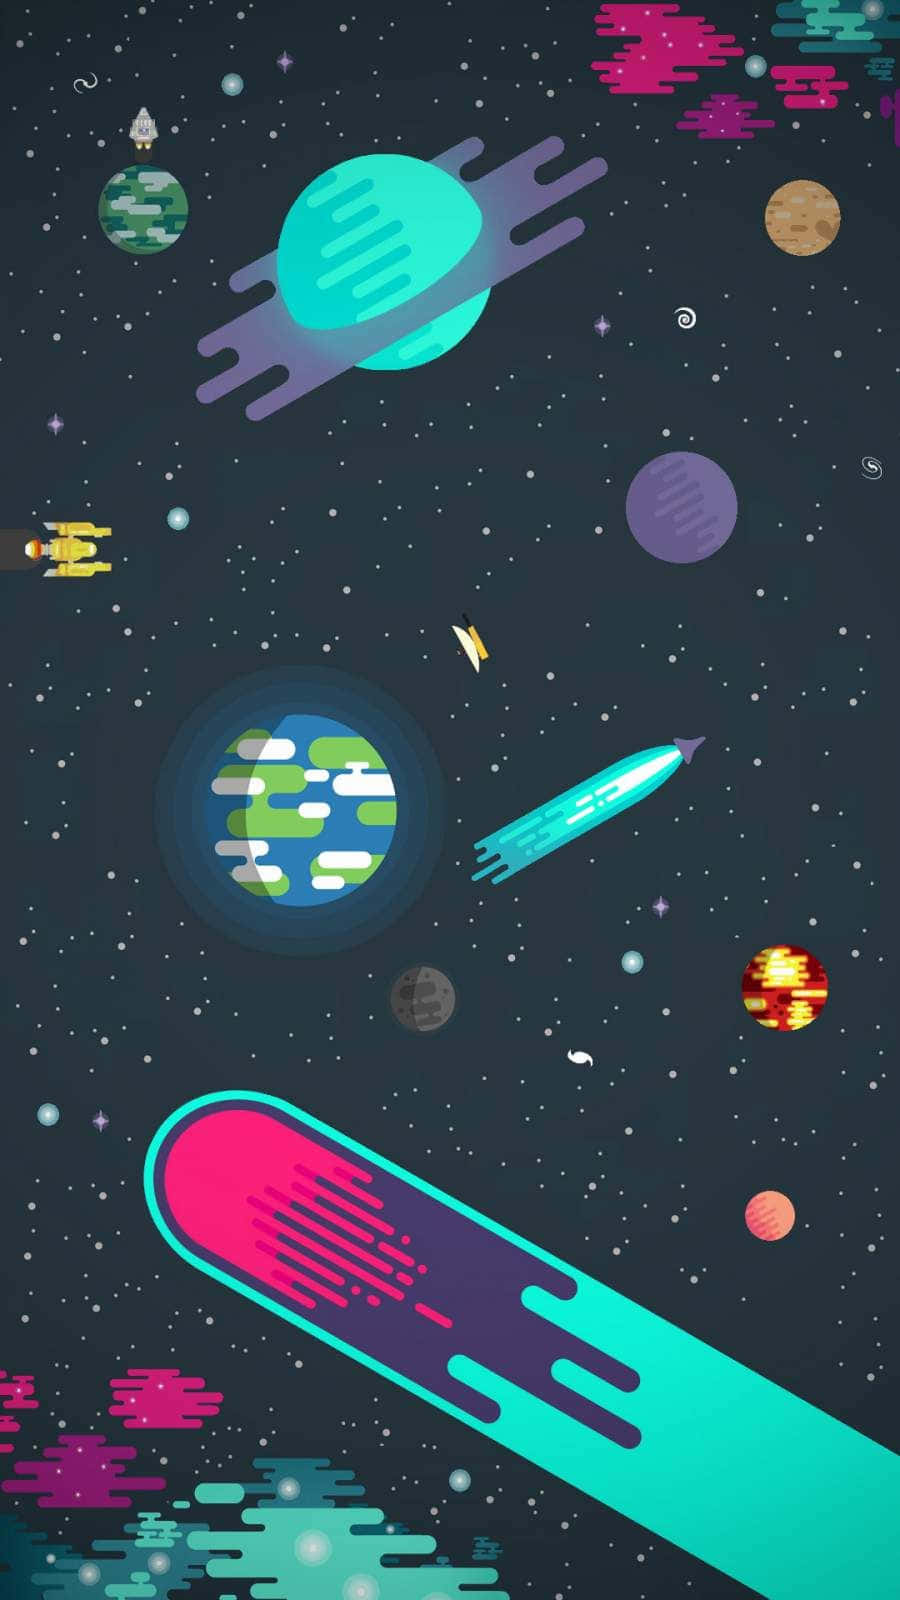 Blast off into adventure with an amazing cartoon space journey! Wallpaper